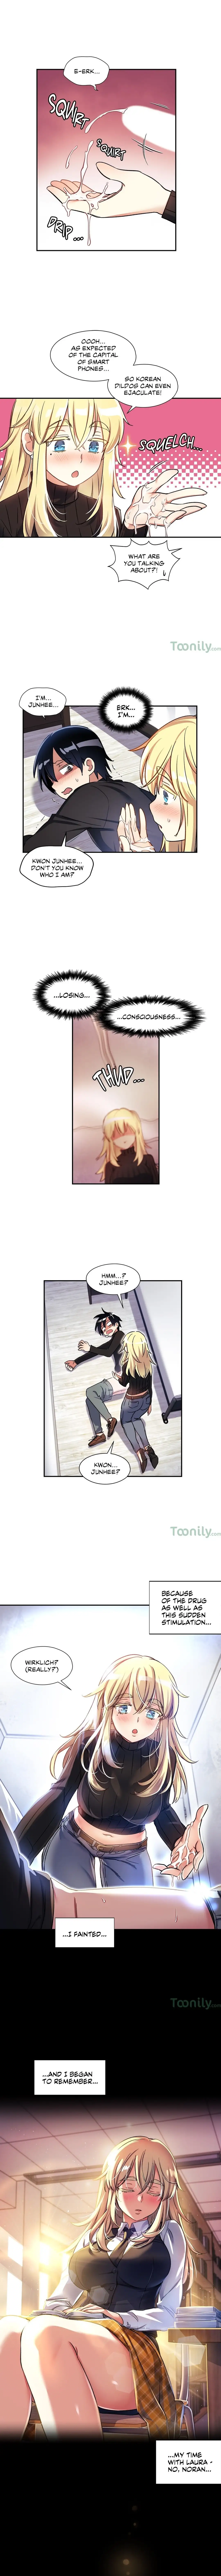 Under Observation My First Loves and I - Chapter 8 Page 6